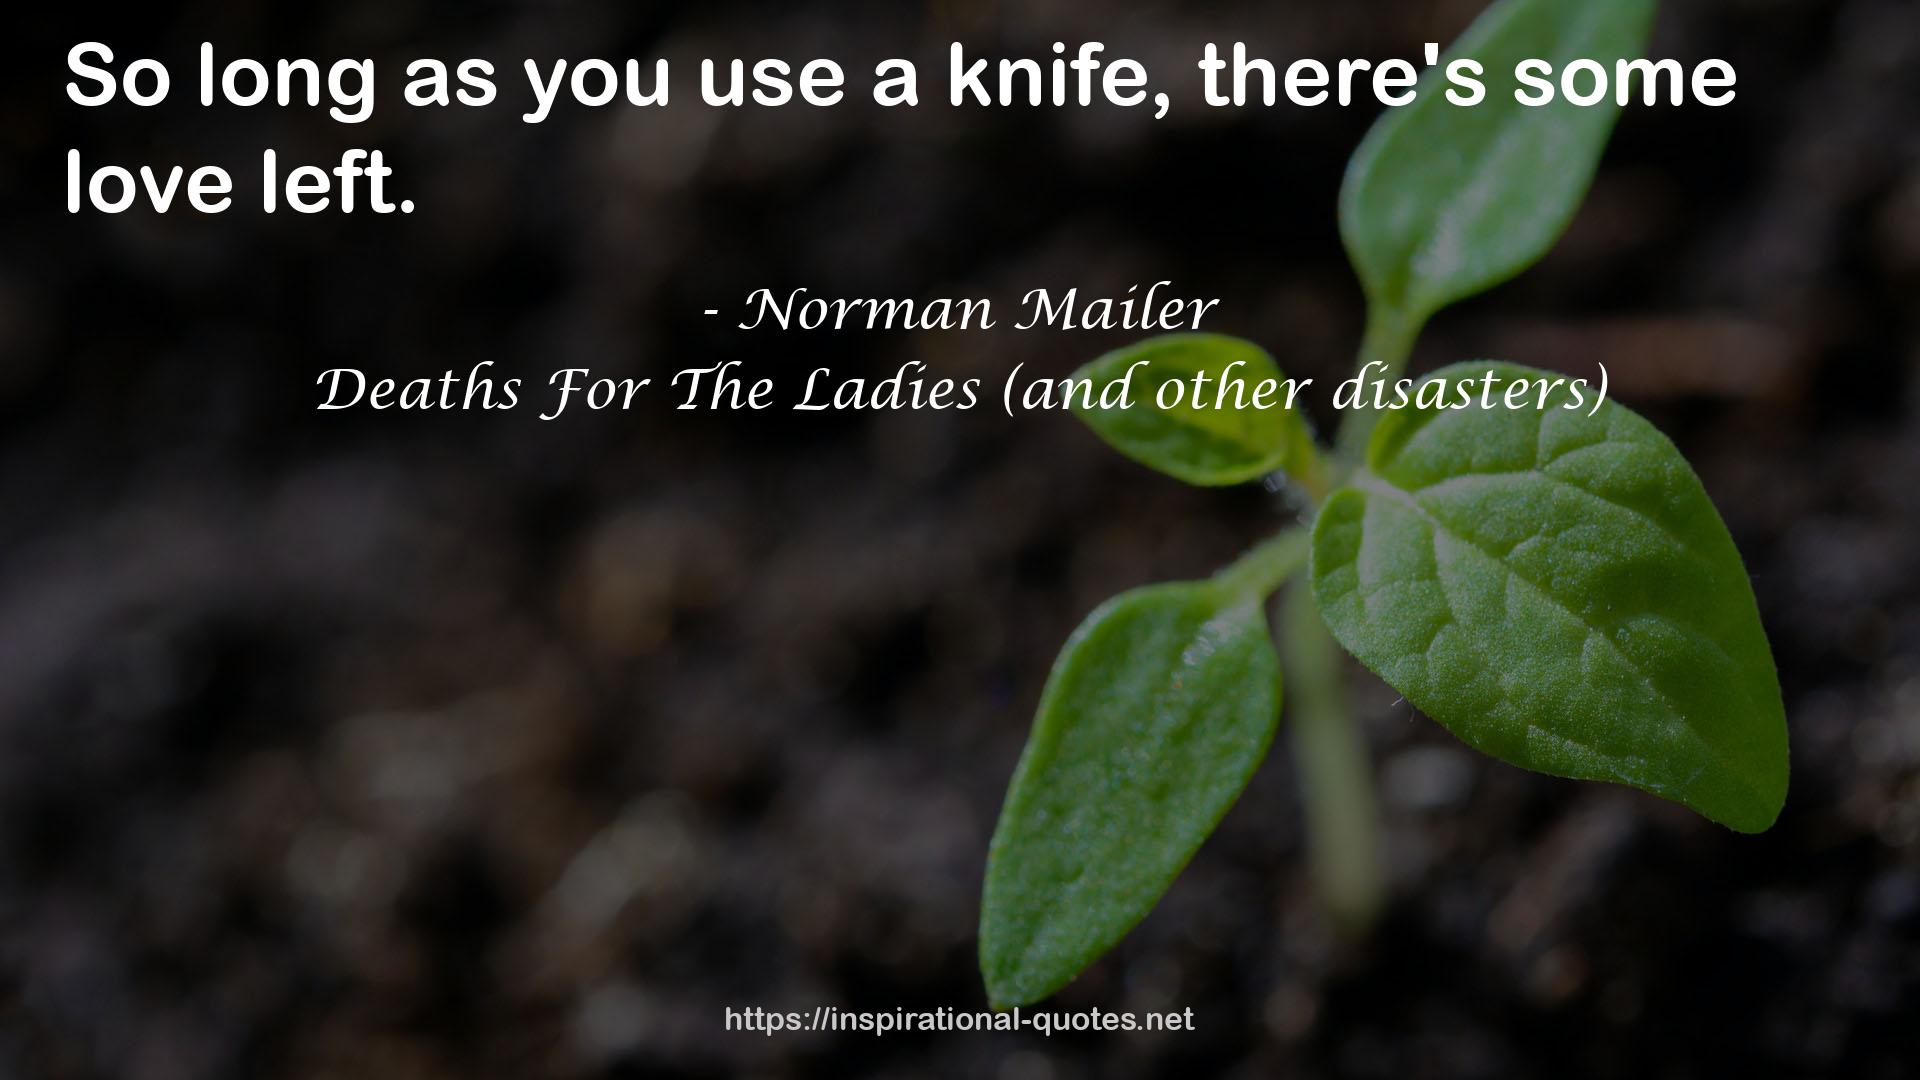 Norman Mailer QUOTES